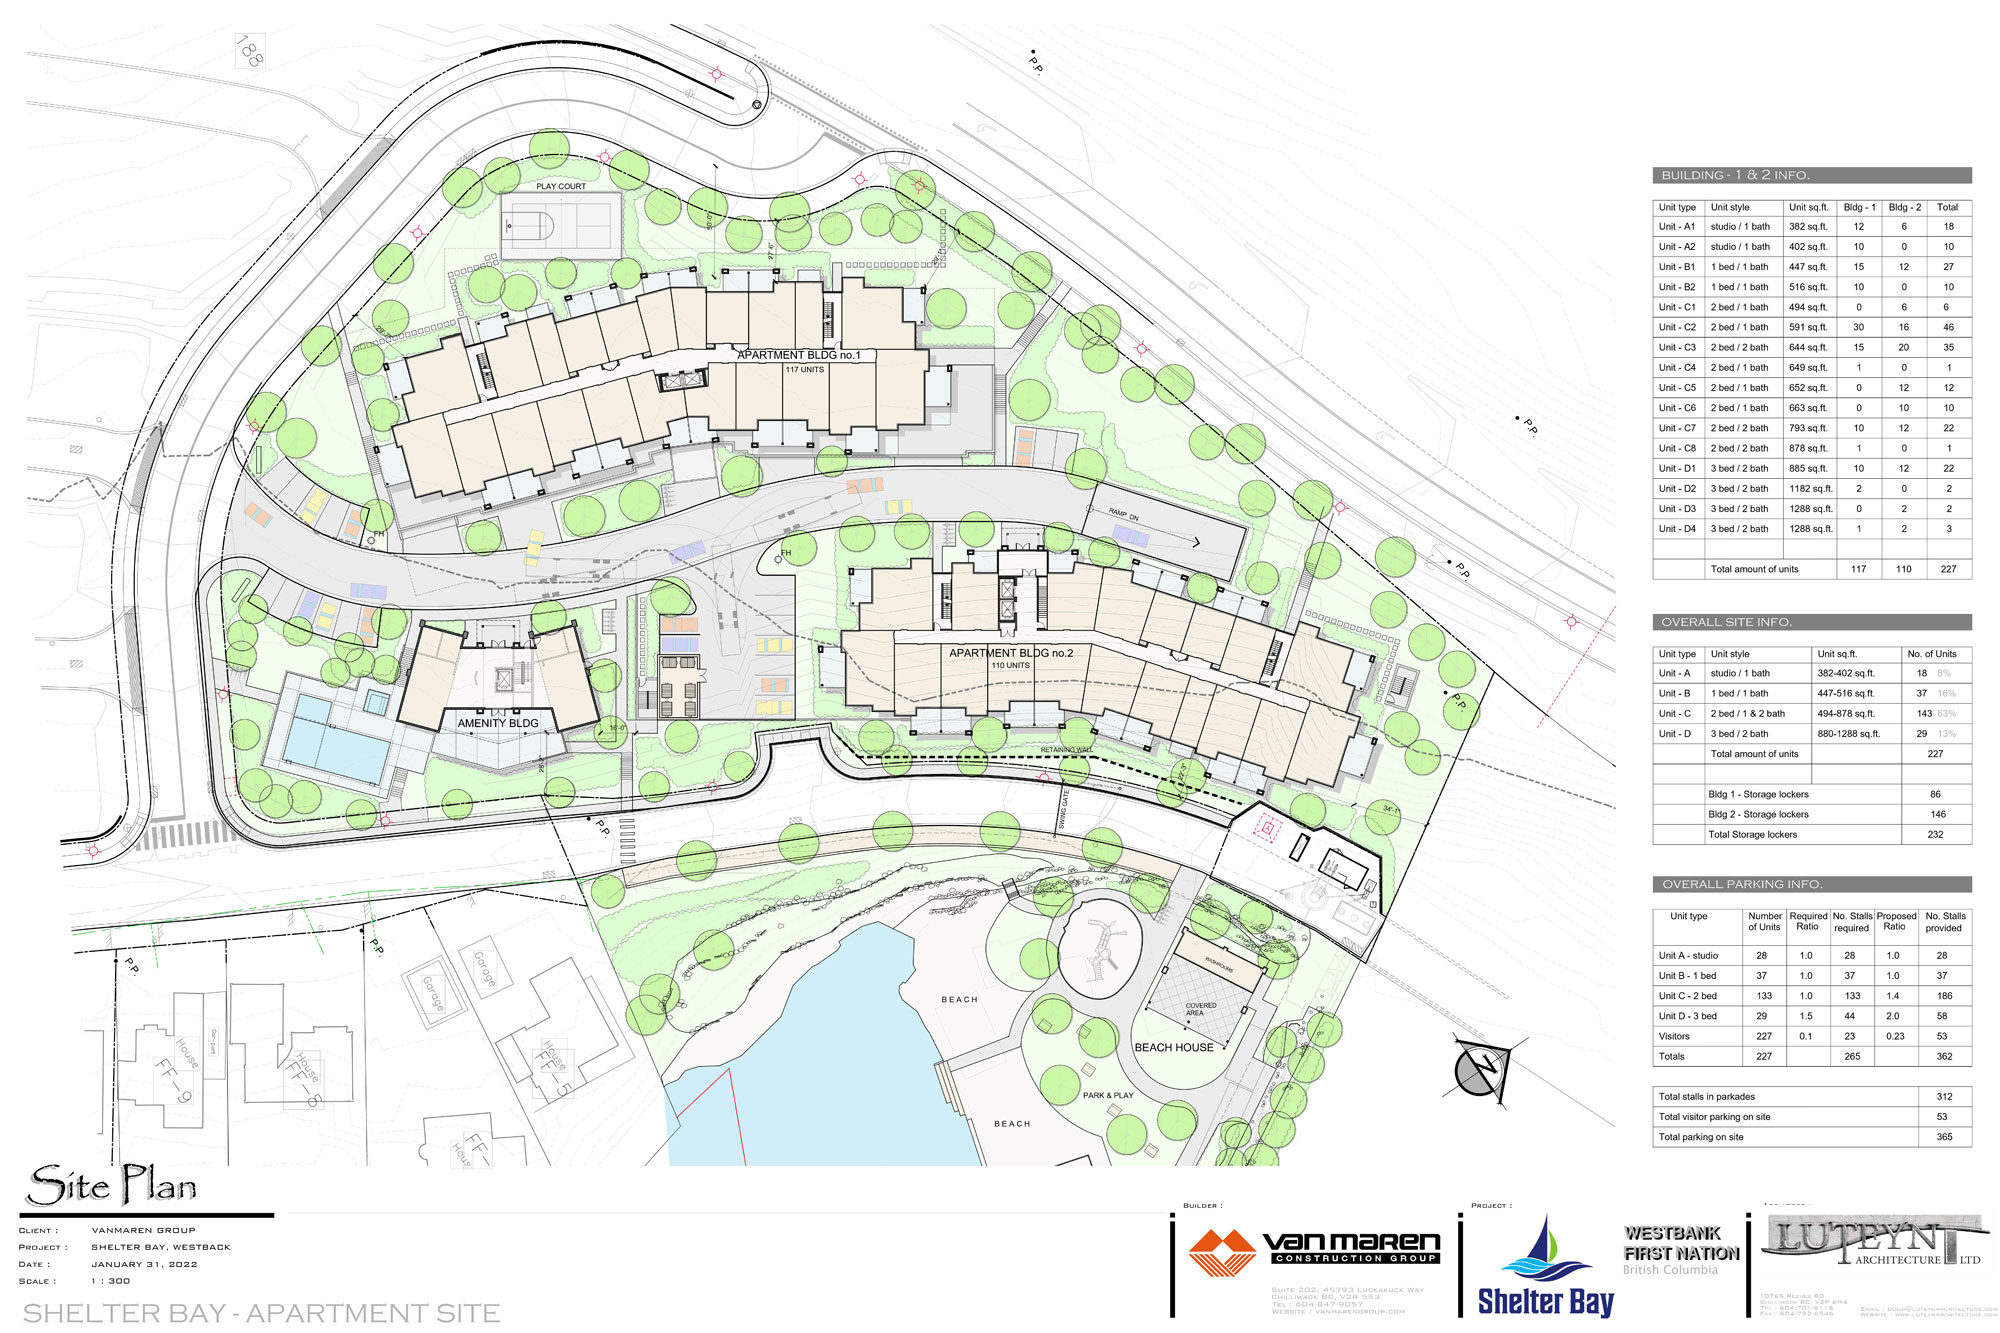 Shelter Bay apartments site plan